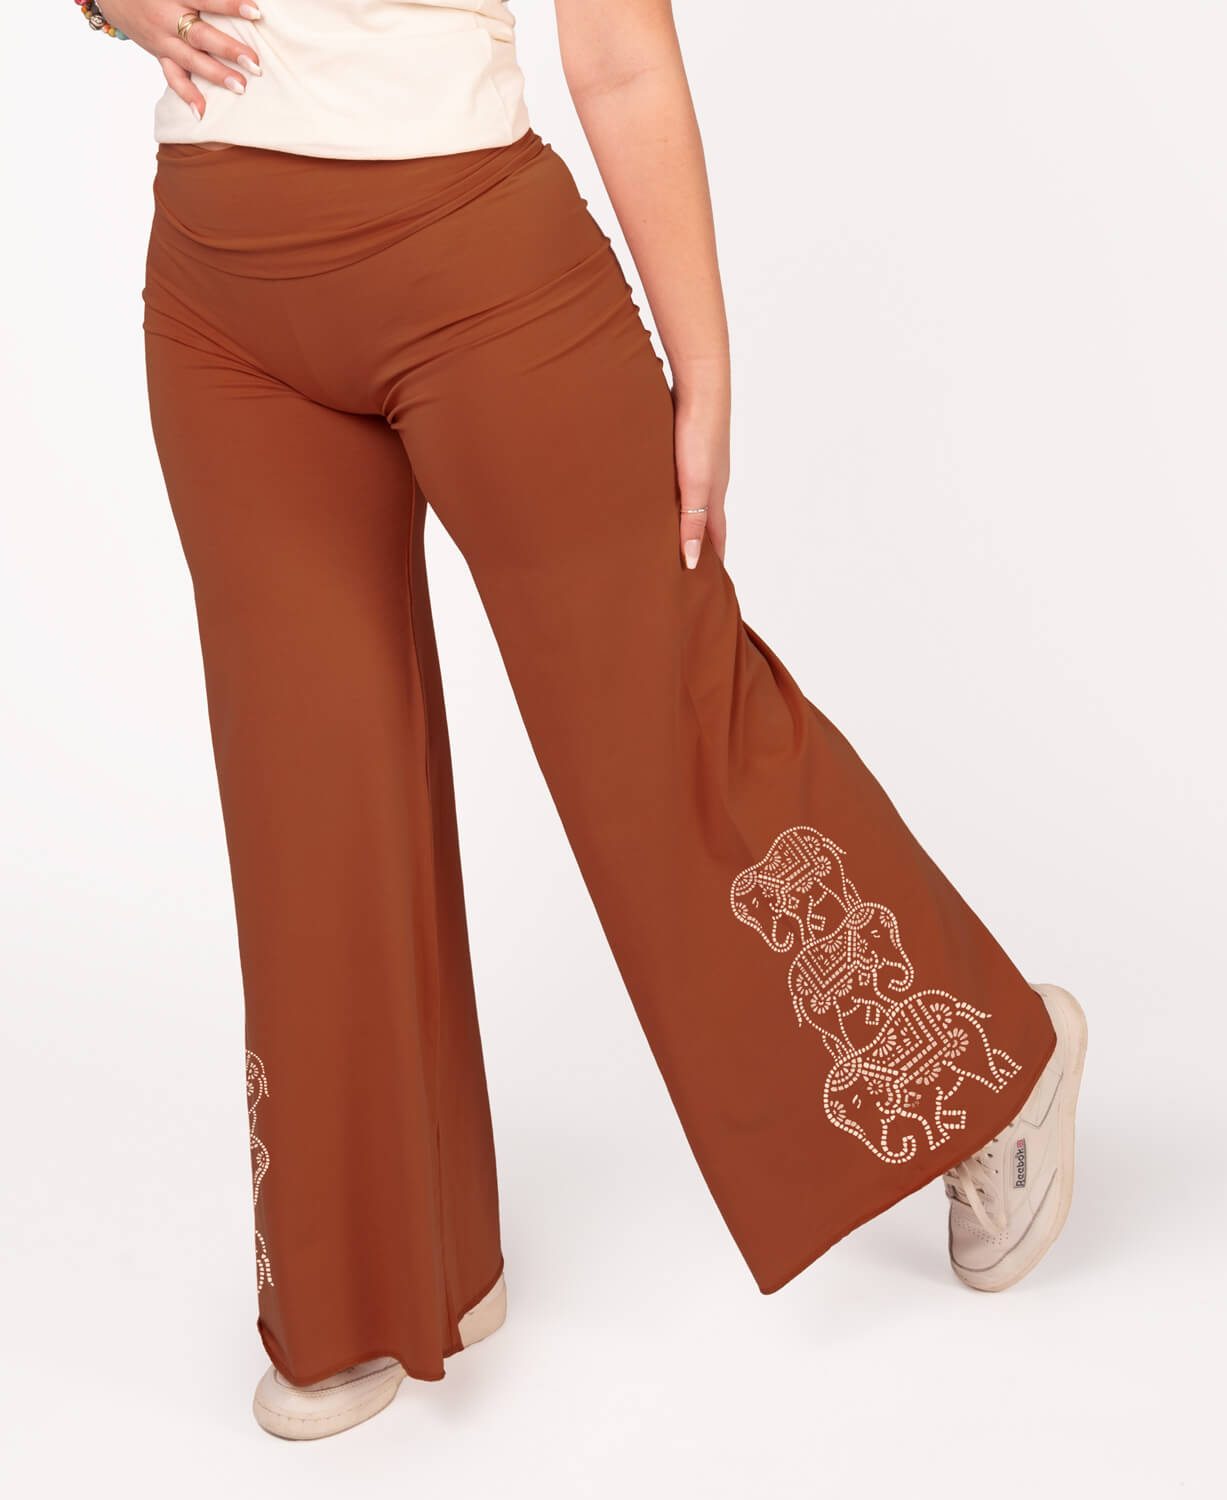 Closeout! Stacked Elephants Flowy Pants